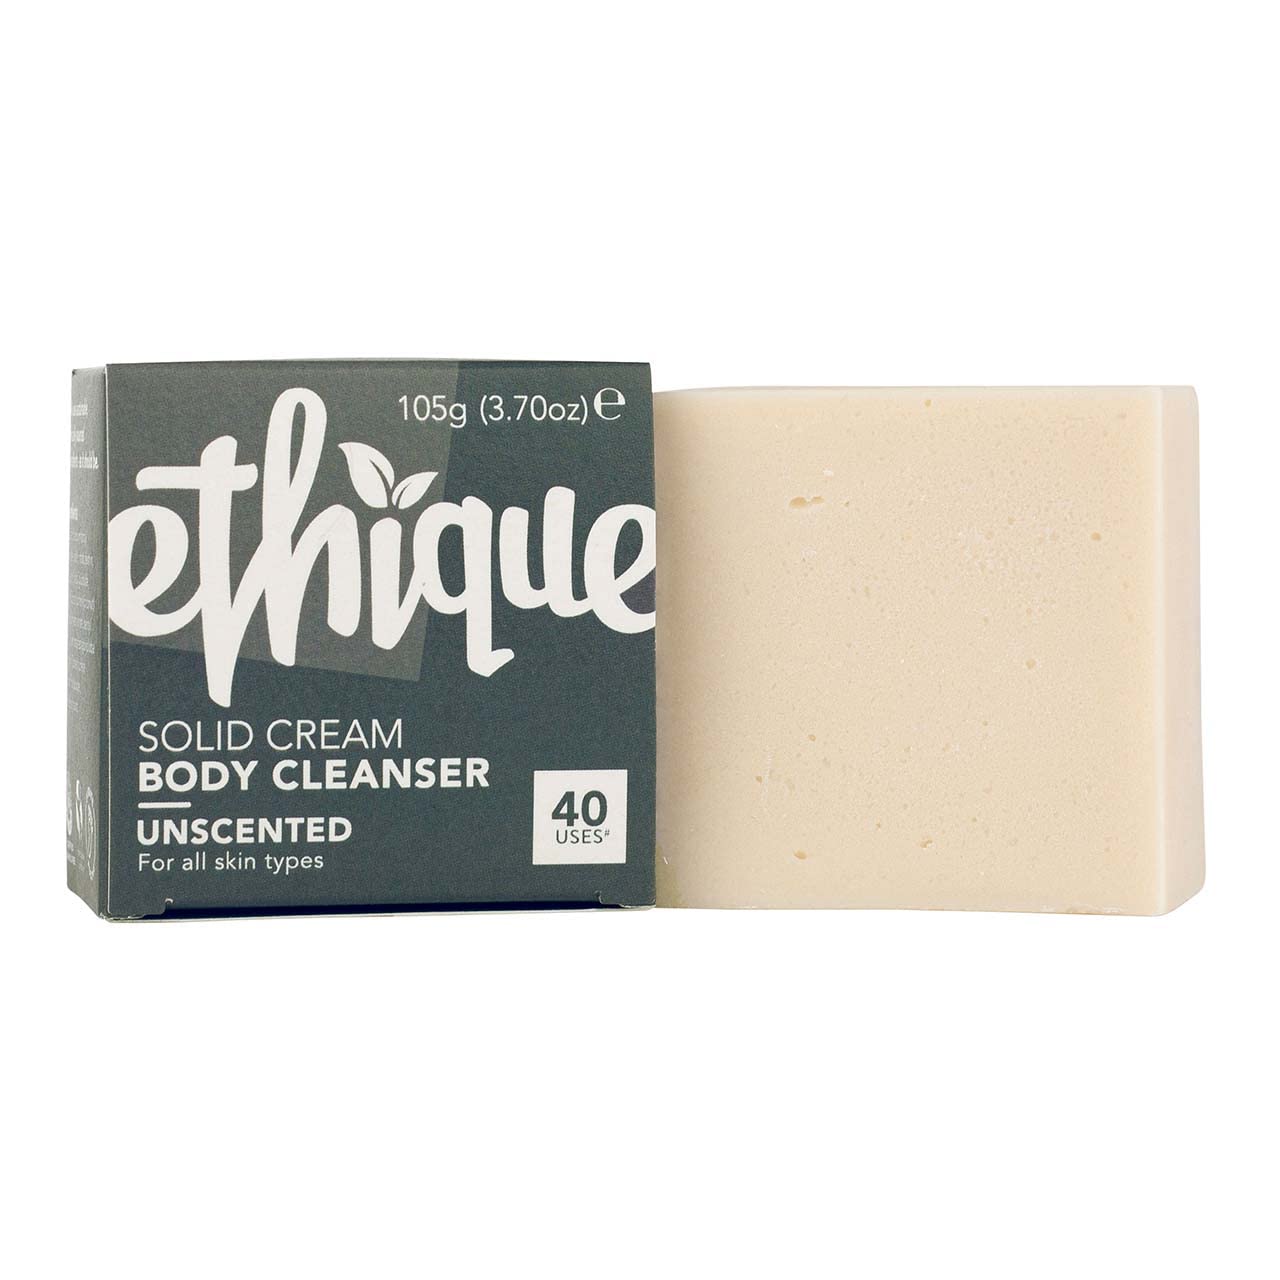 Ethique Unscented Solid Cream Body Cleanser - Body Wash for Dry and Sensitive Skin - Plastic-Free, Vegan, Cruelty-Free, Eco-Friendly, 3.7 oz (Pack of 1)